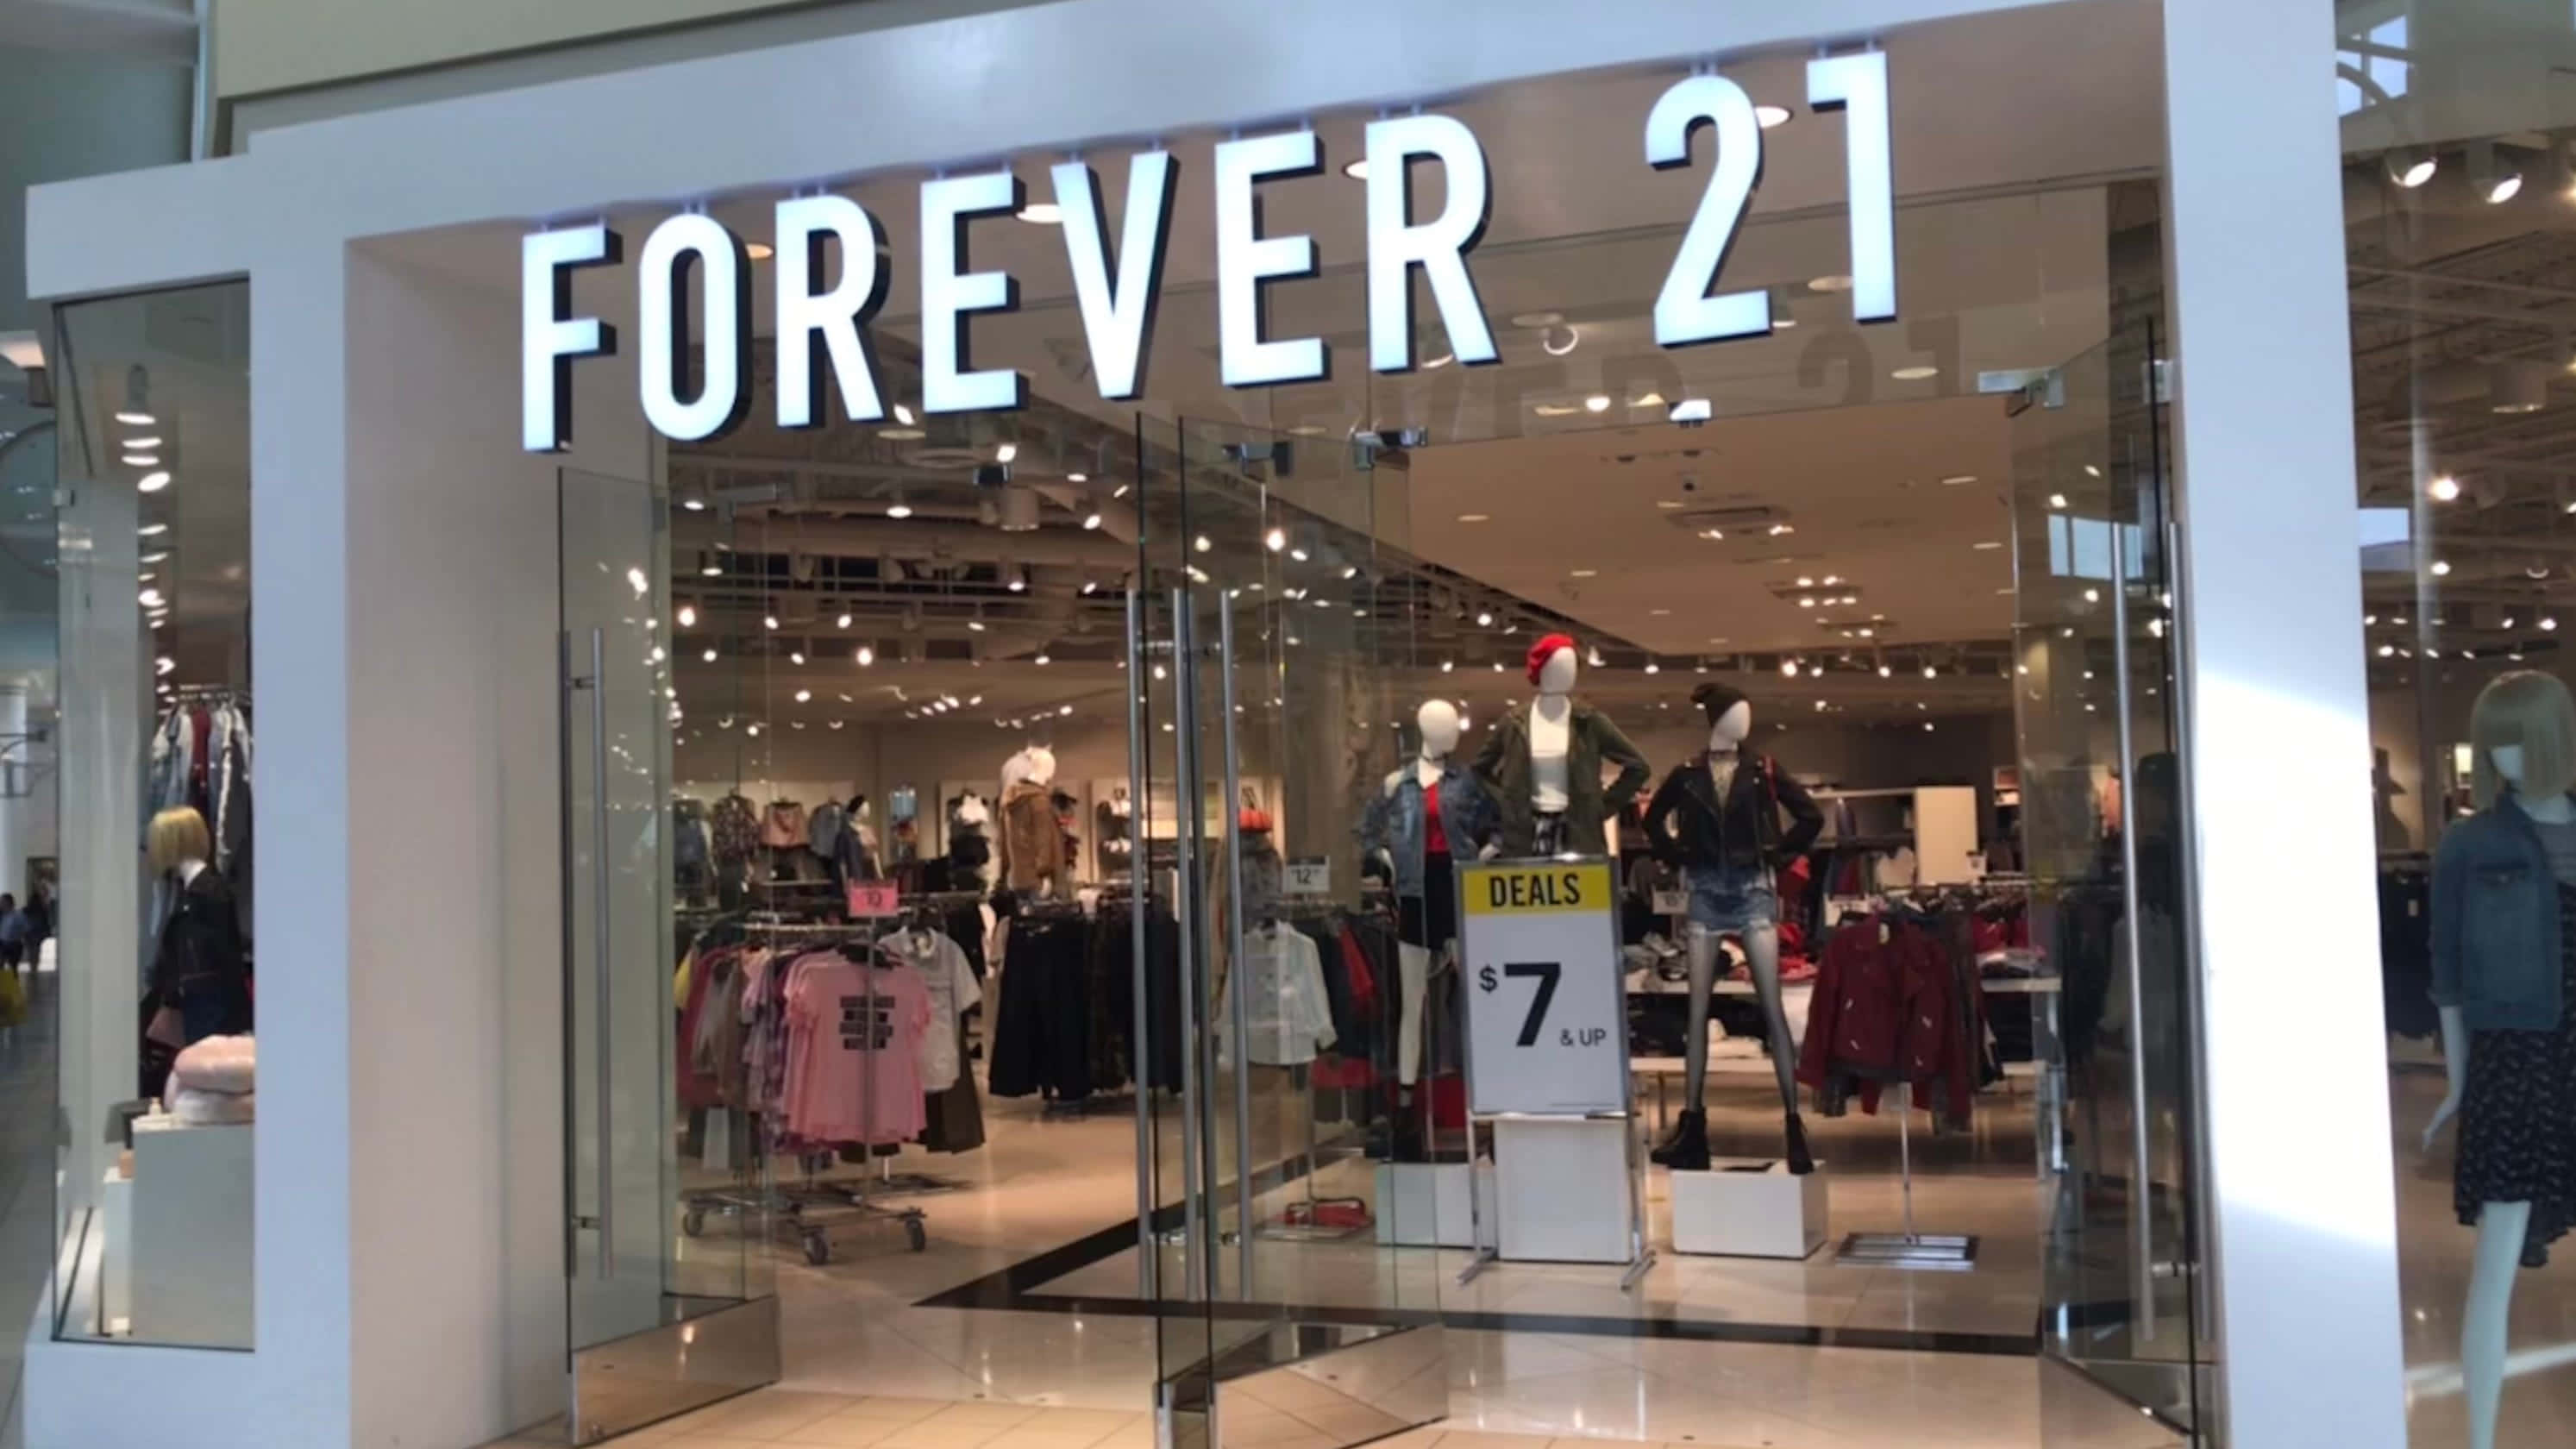 Shop This Summer With Forever 21